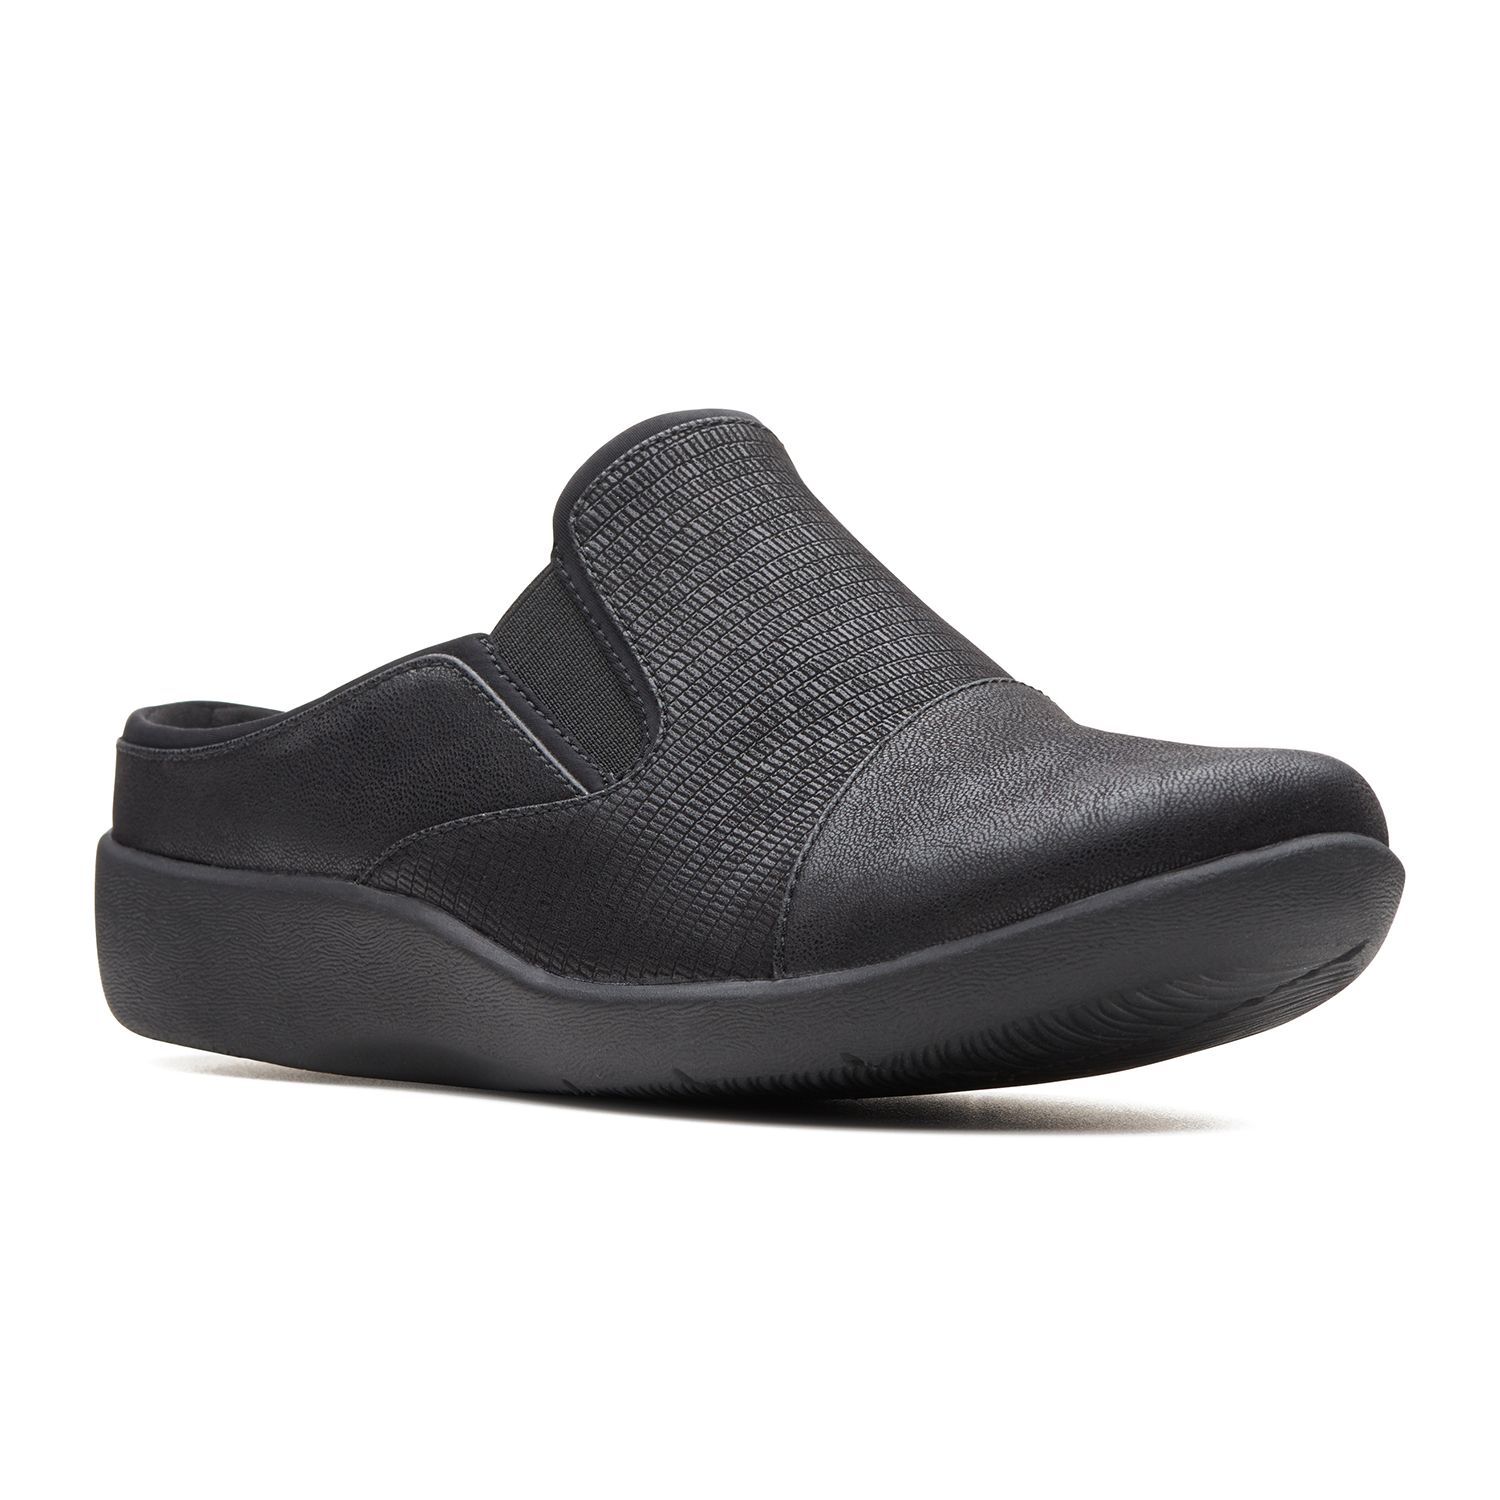 clarks cloudsteppers sillian free